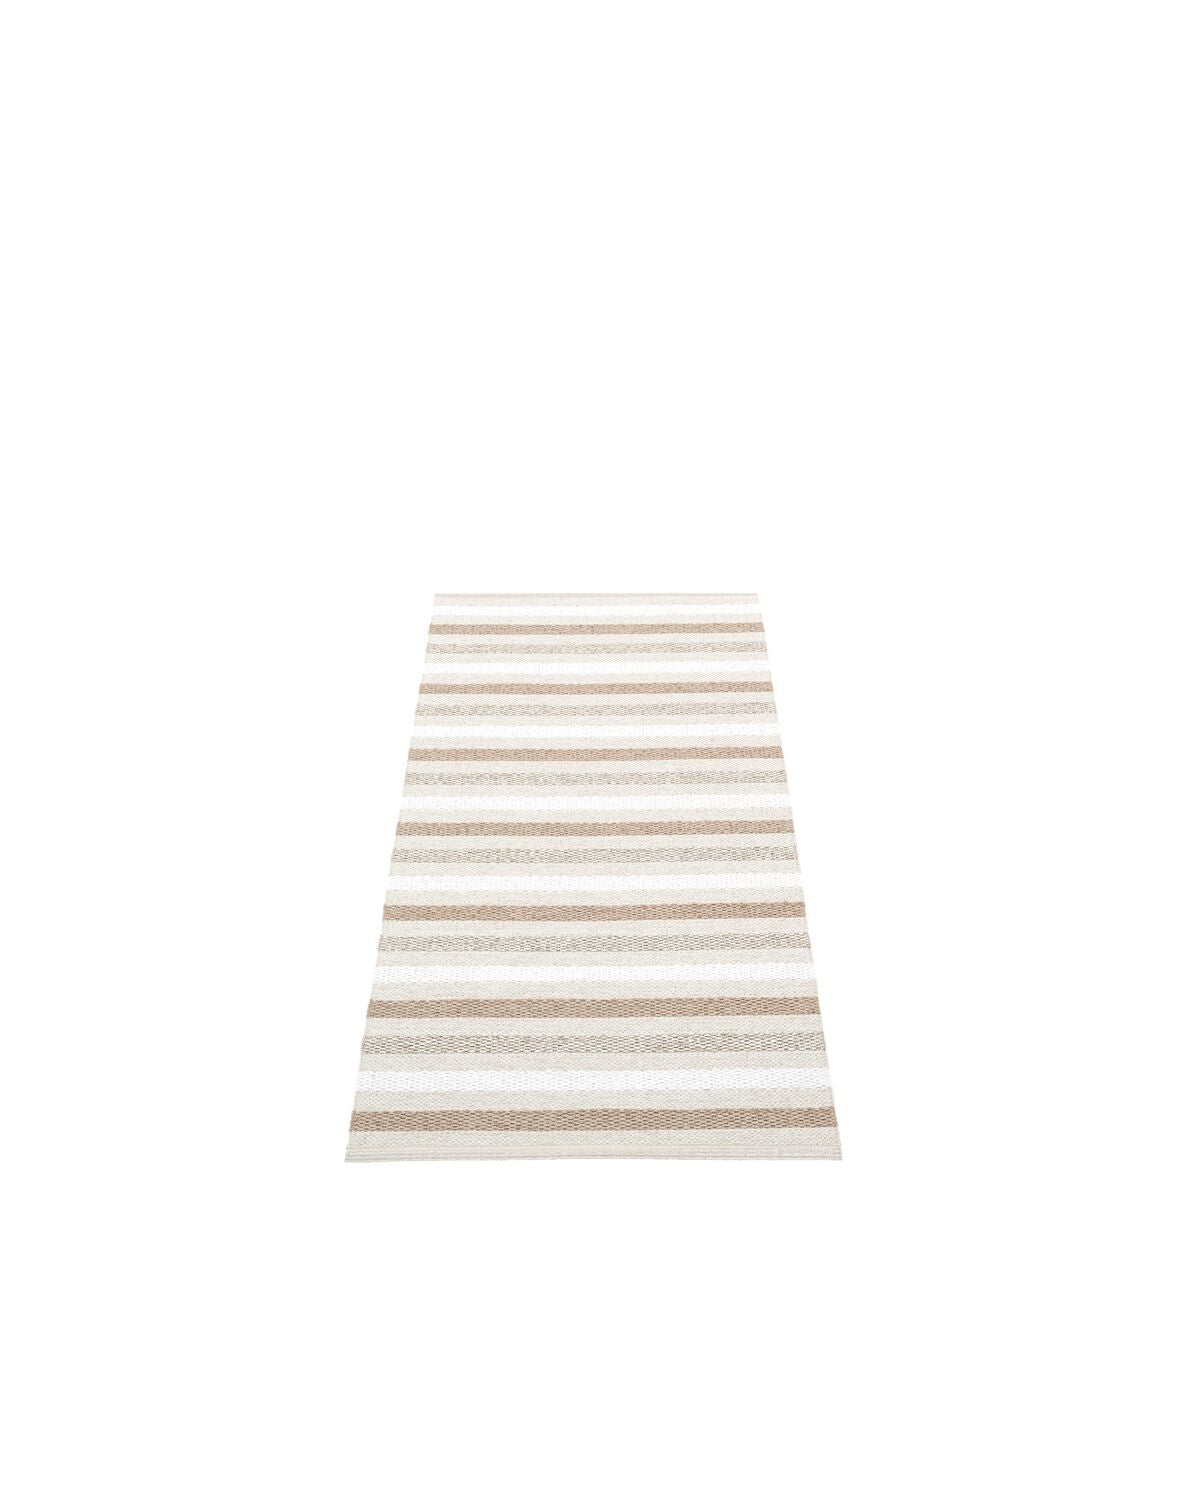 Pappelina Rug GRACE Fossil  image 3